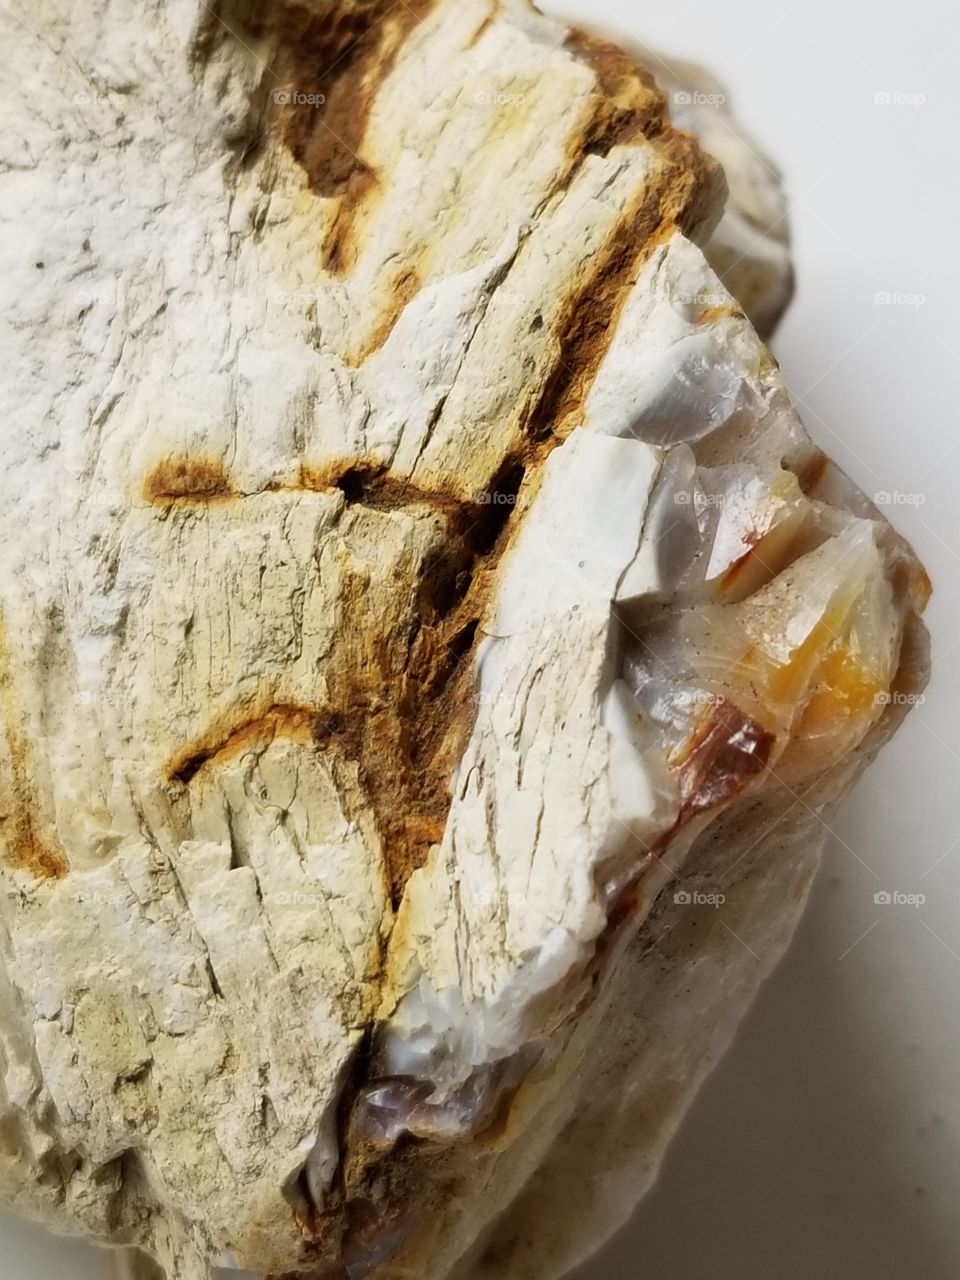 Opalized Wood Fossil Upclose